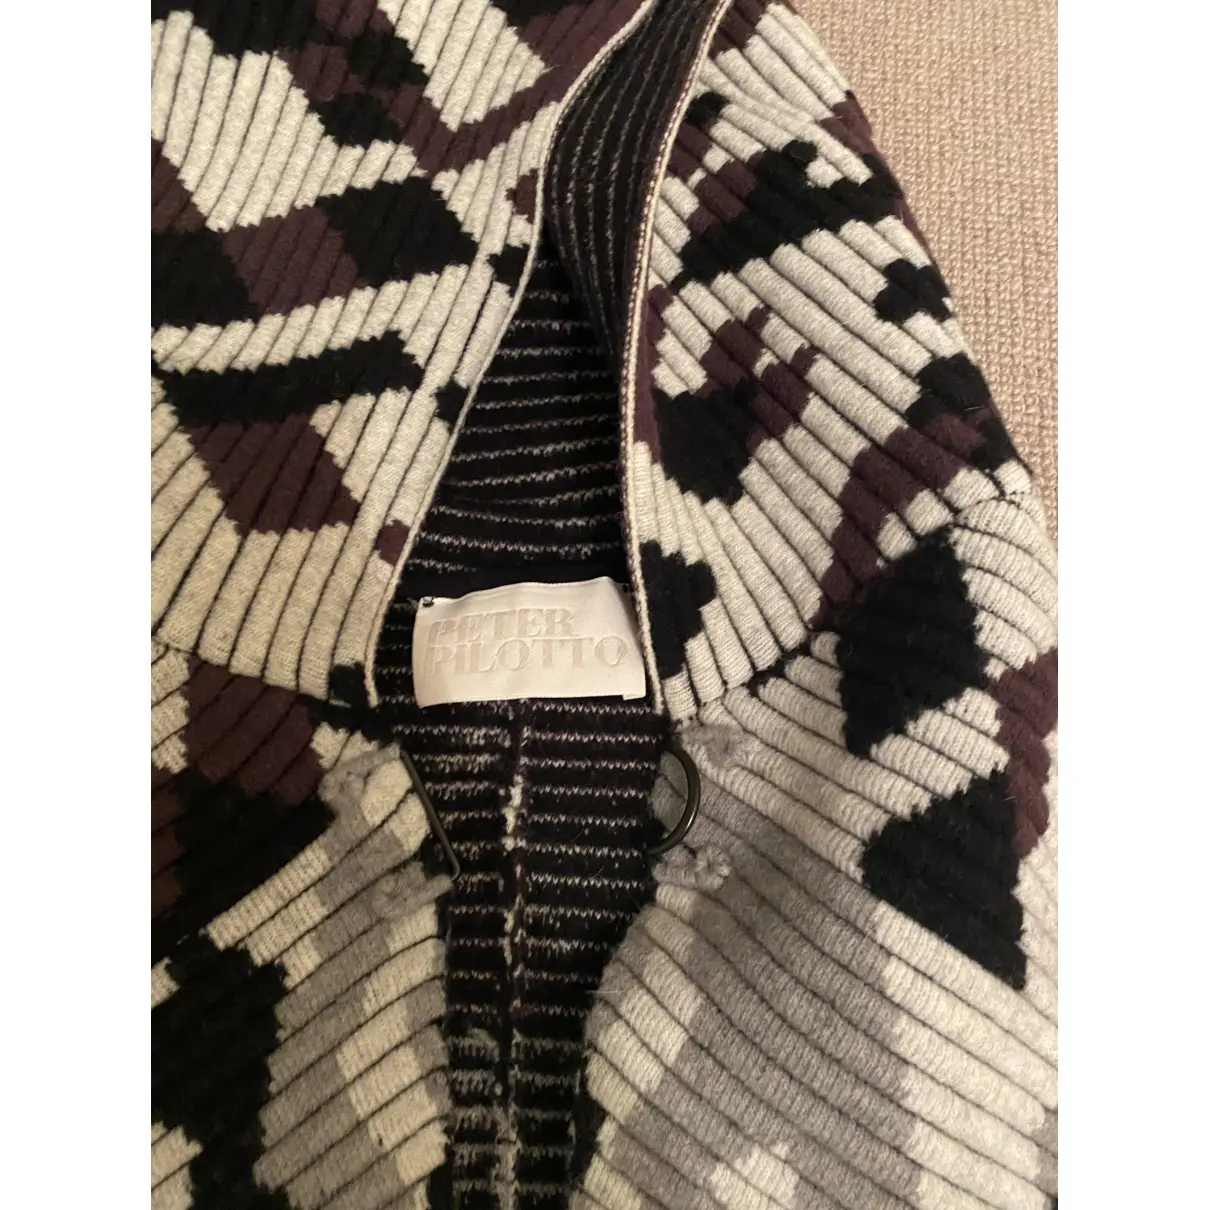 Buy Peter Pilotto Wool poncho online